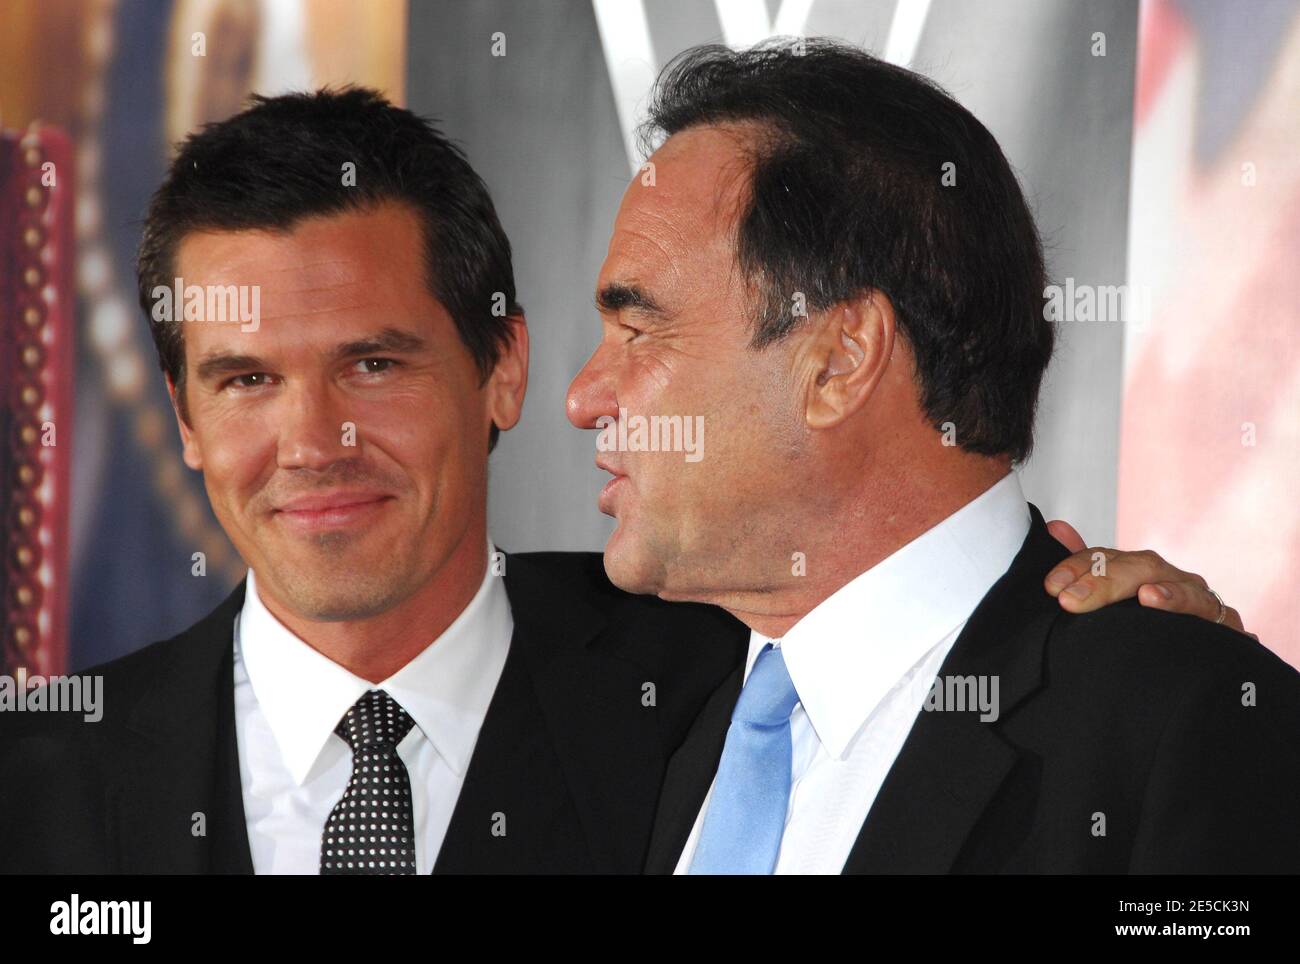 Director Oliver Stone (R) and actor Josh Brolin attending the premiere of 'W' at the Ziegfeld Theatre in New York City, NY, USA on October 14, 2008. Photo by Gregorio Binuya/ABACAPRESS.COM Stock Photo